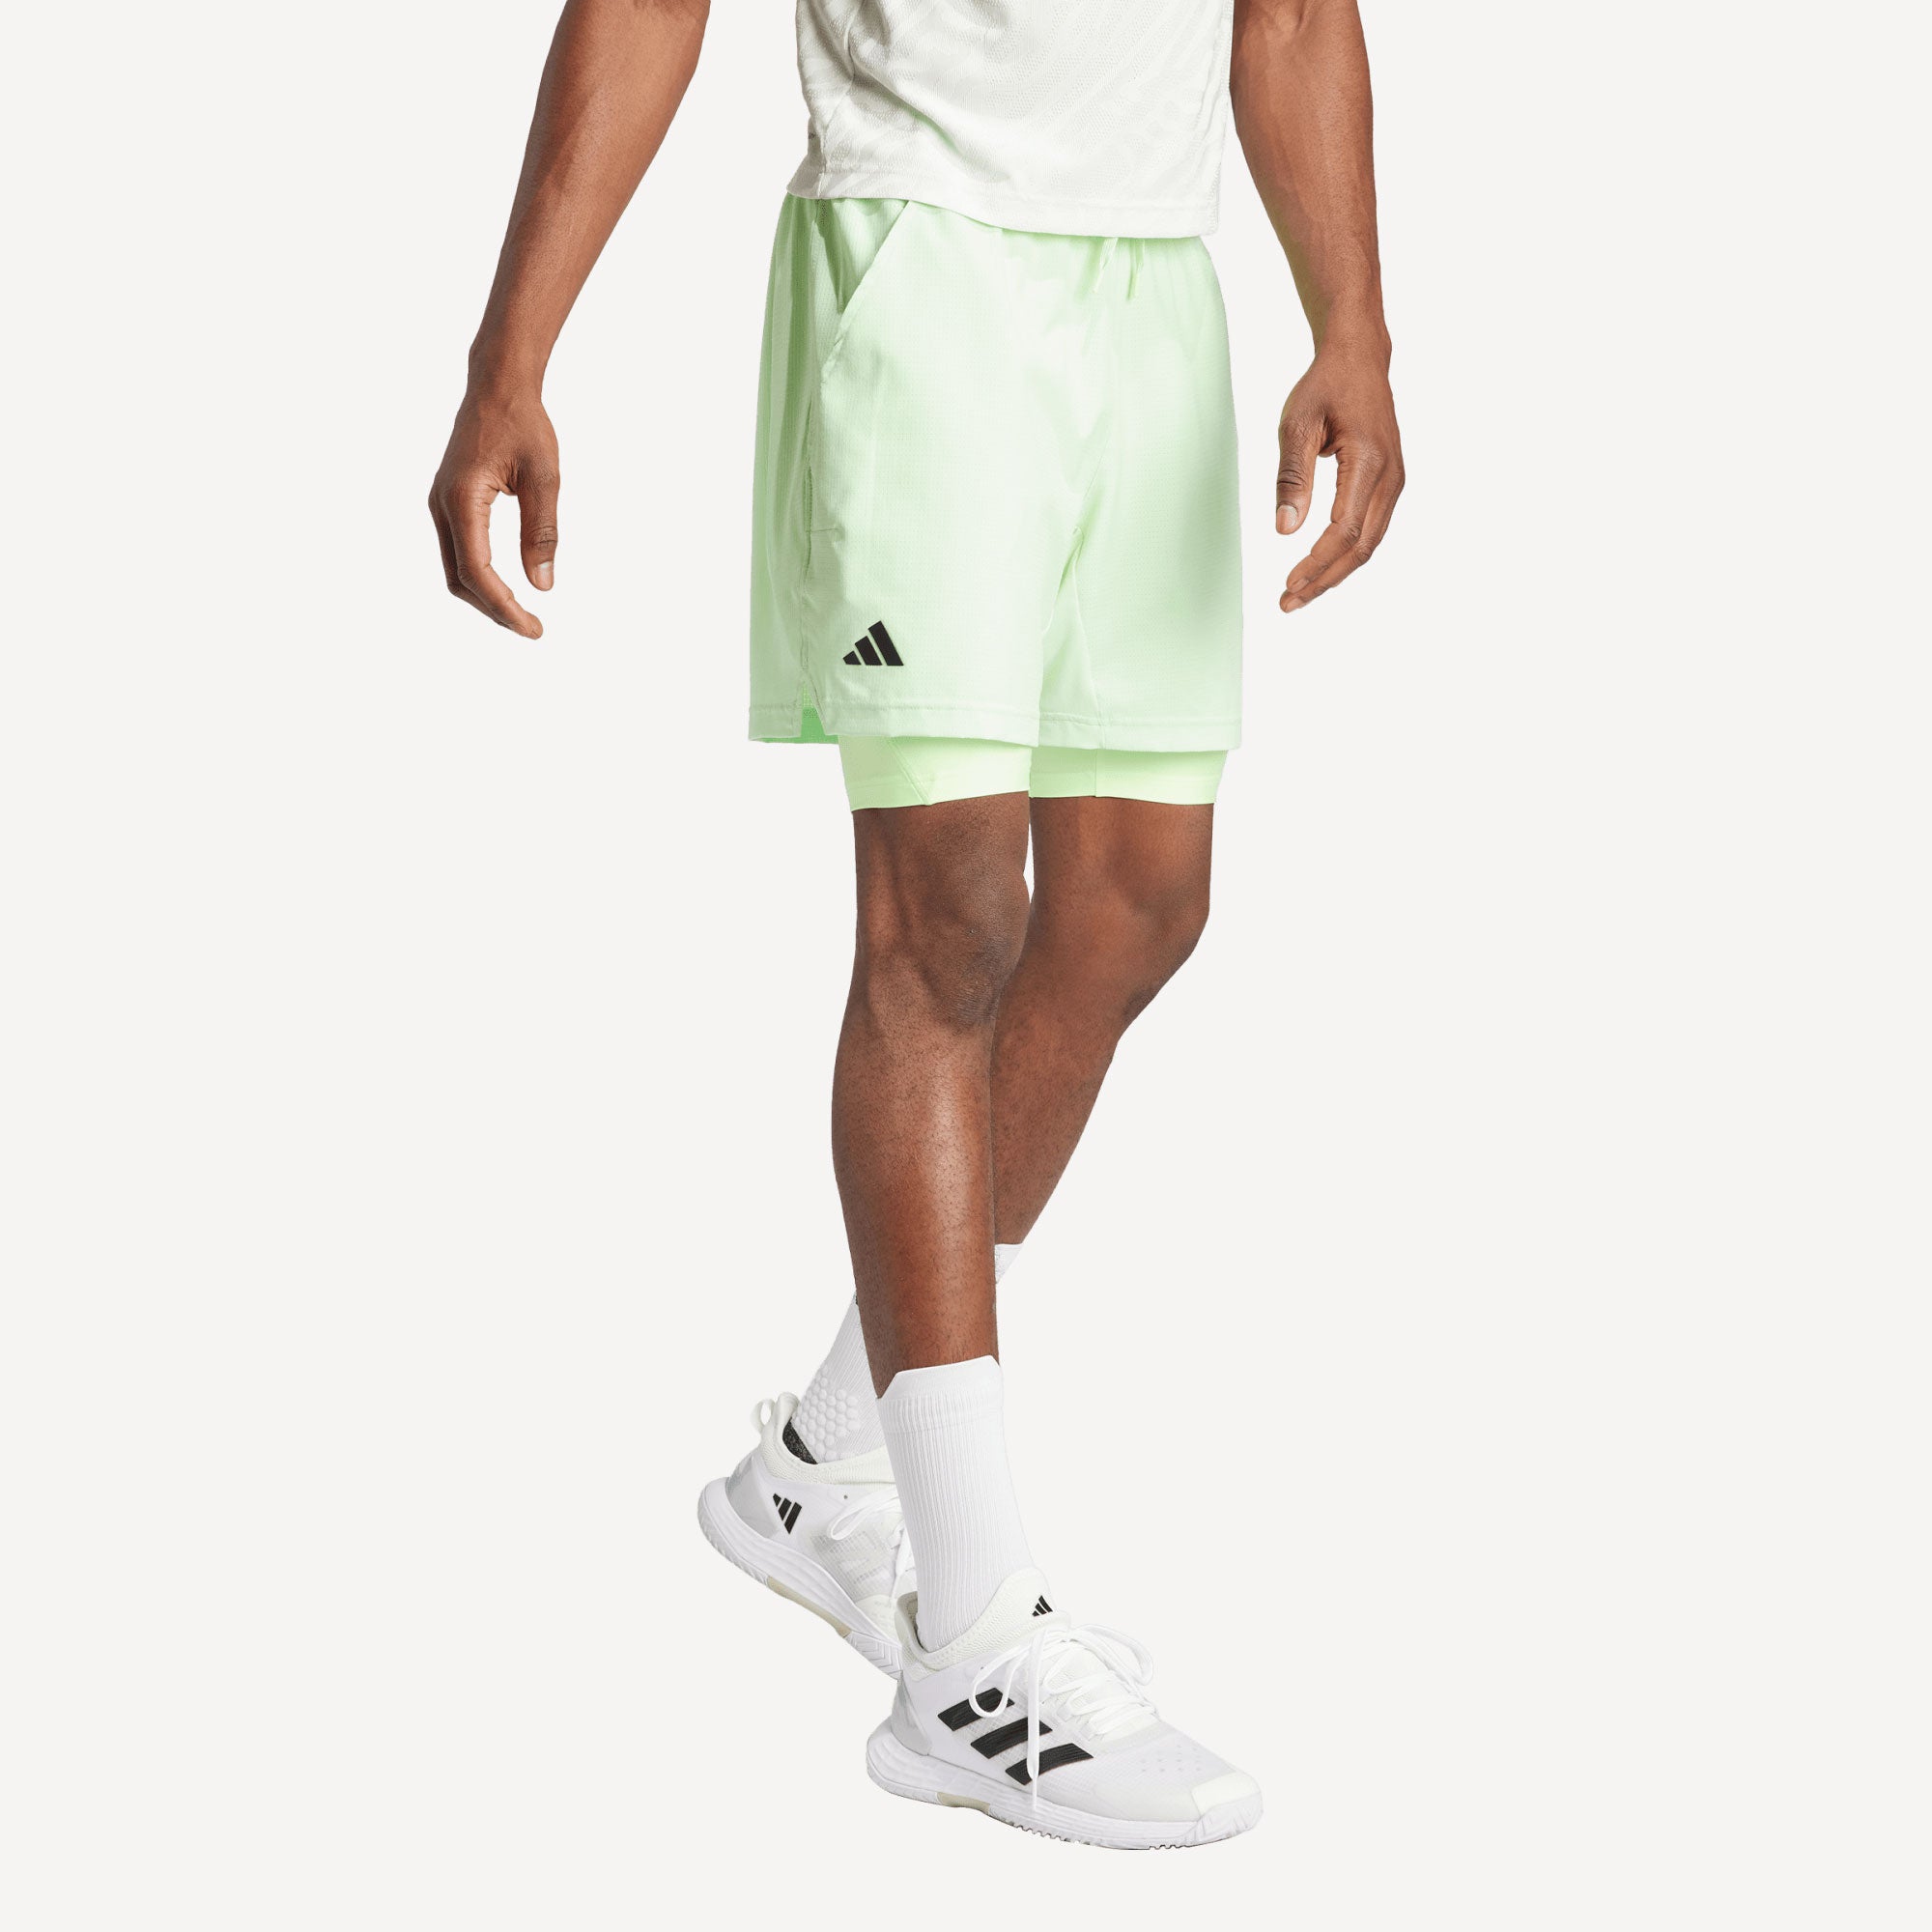 adidas Pro Melbourne Men's Tennis Shorts and Inner Shorts Set - Green (3)